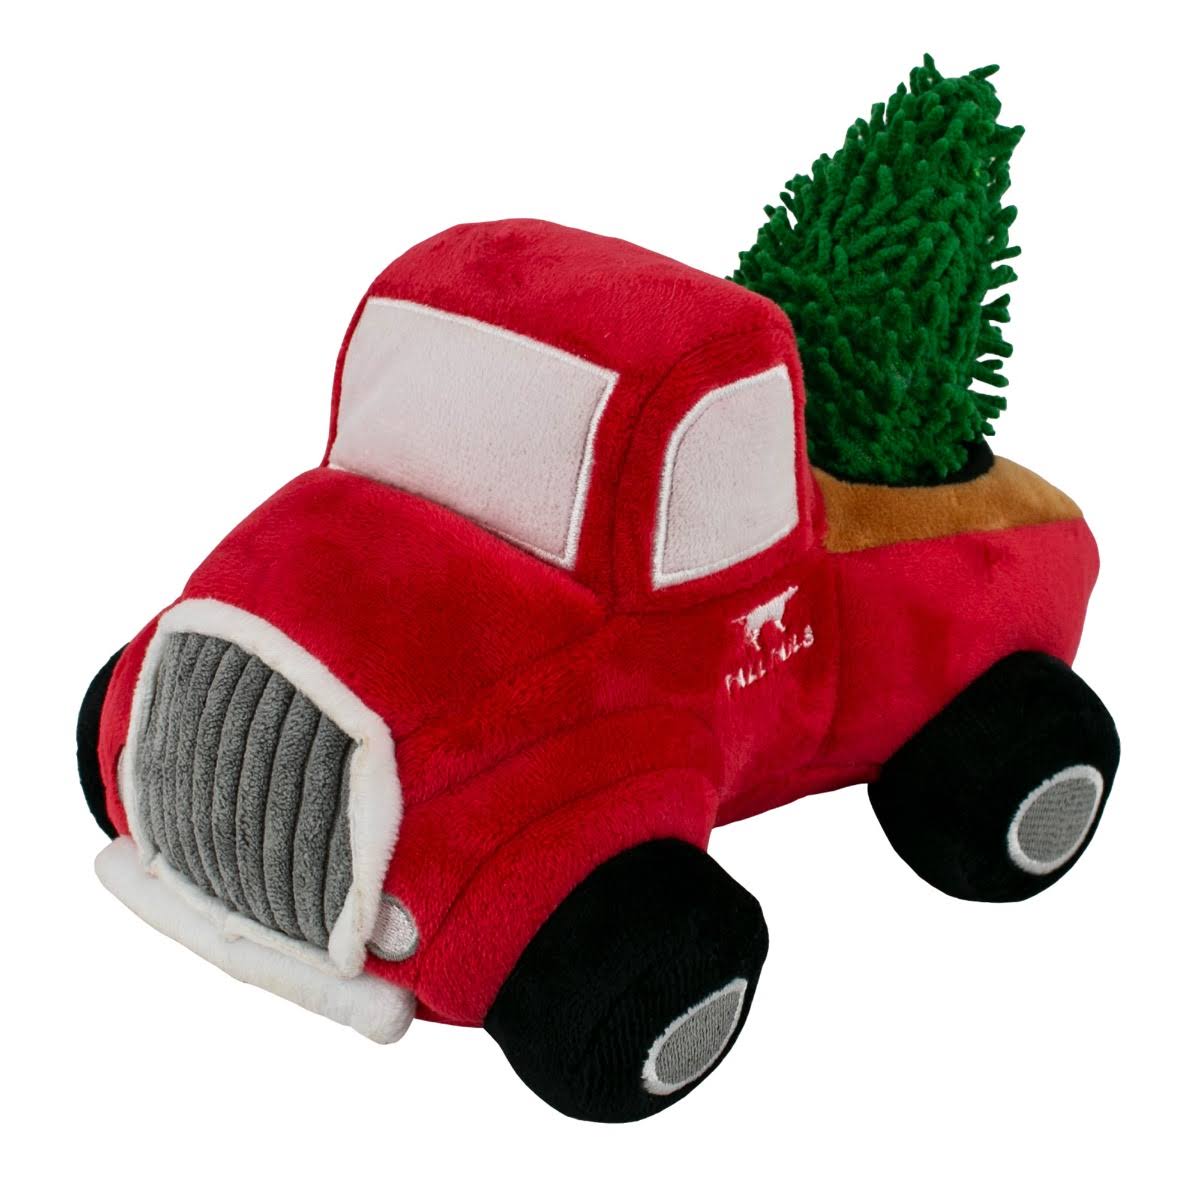 Tall Tails Plush Red Truck with Evergreen Tree Dog Toy